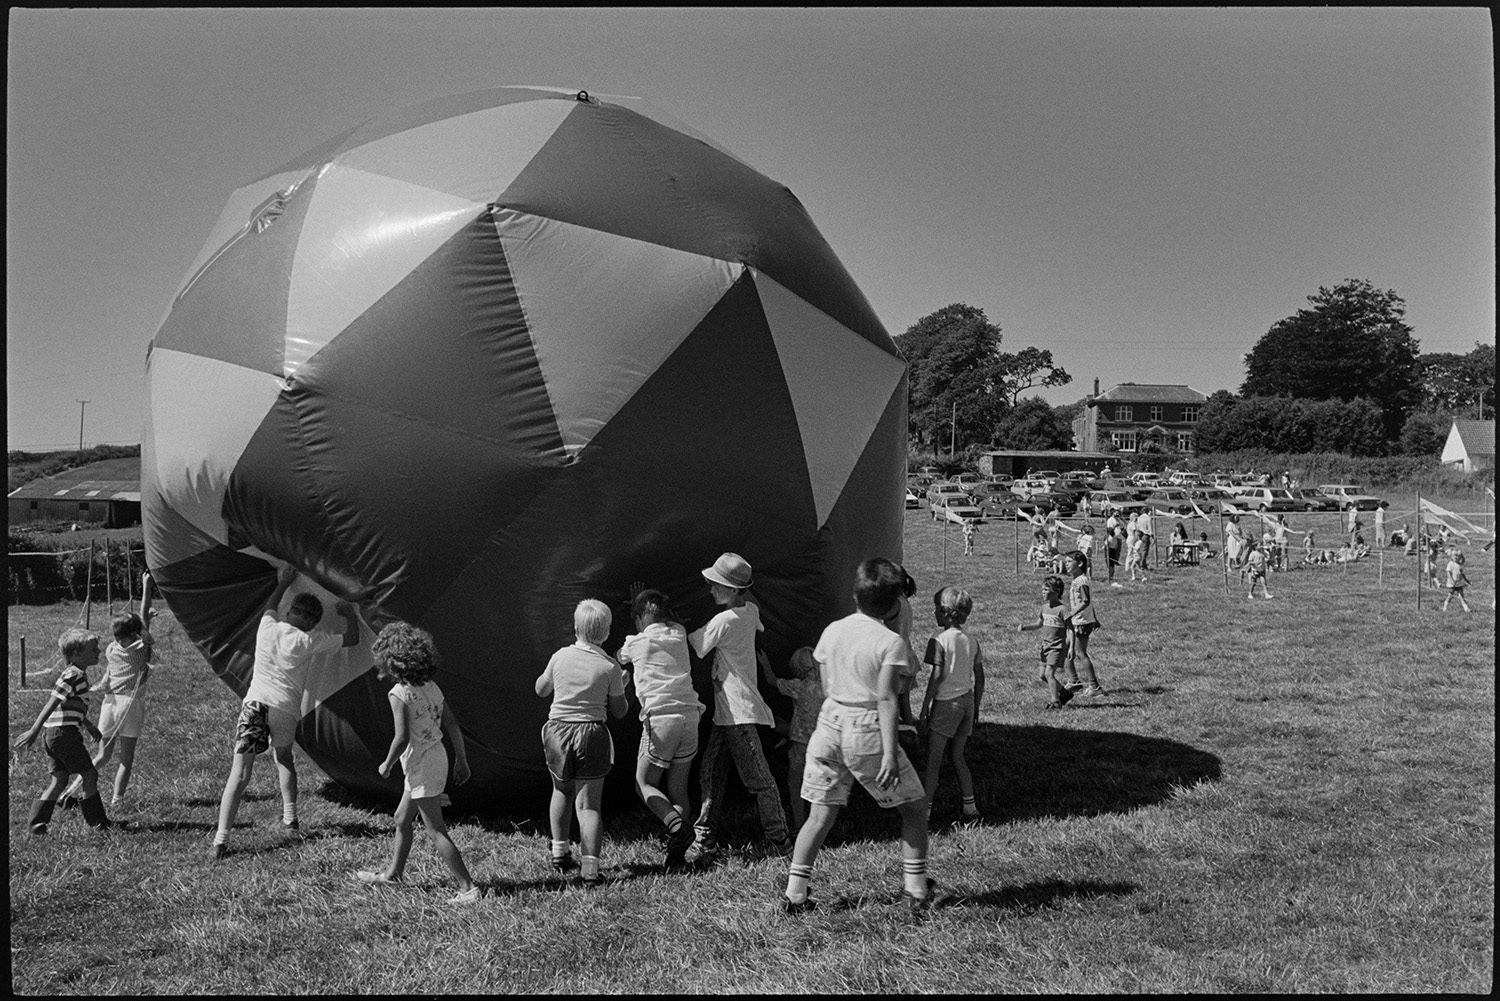 Balloons and kites at Revel.
[A group of children pushing a giant inflated ball at the Beaford Revel. children are playing in the background and a large number of parked cars are visible in the distance.]